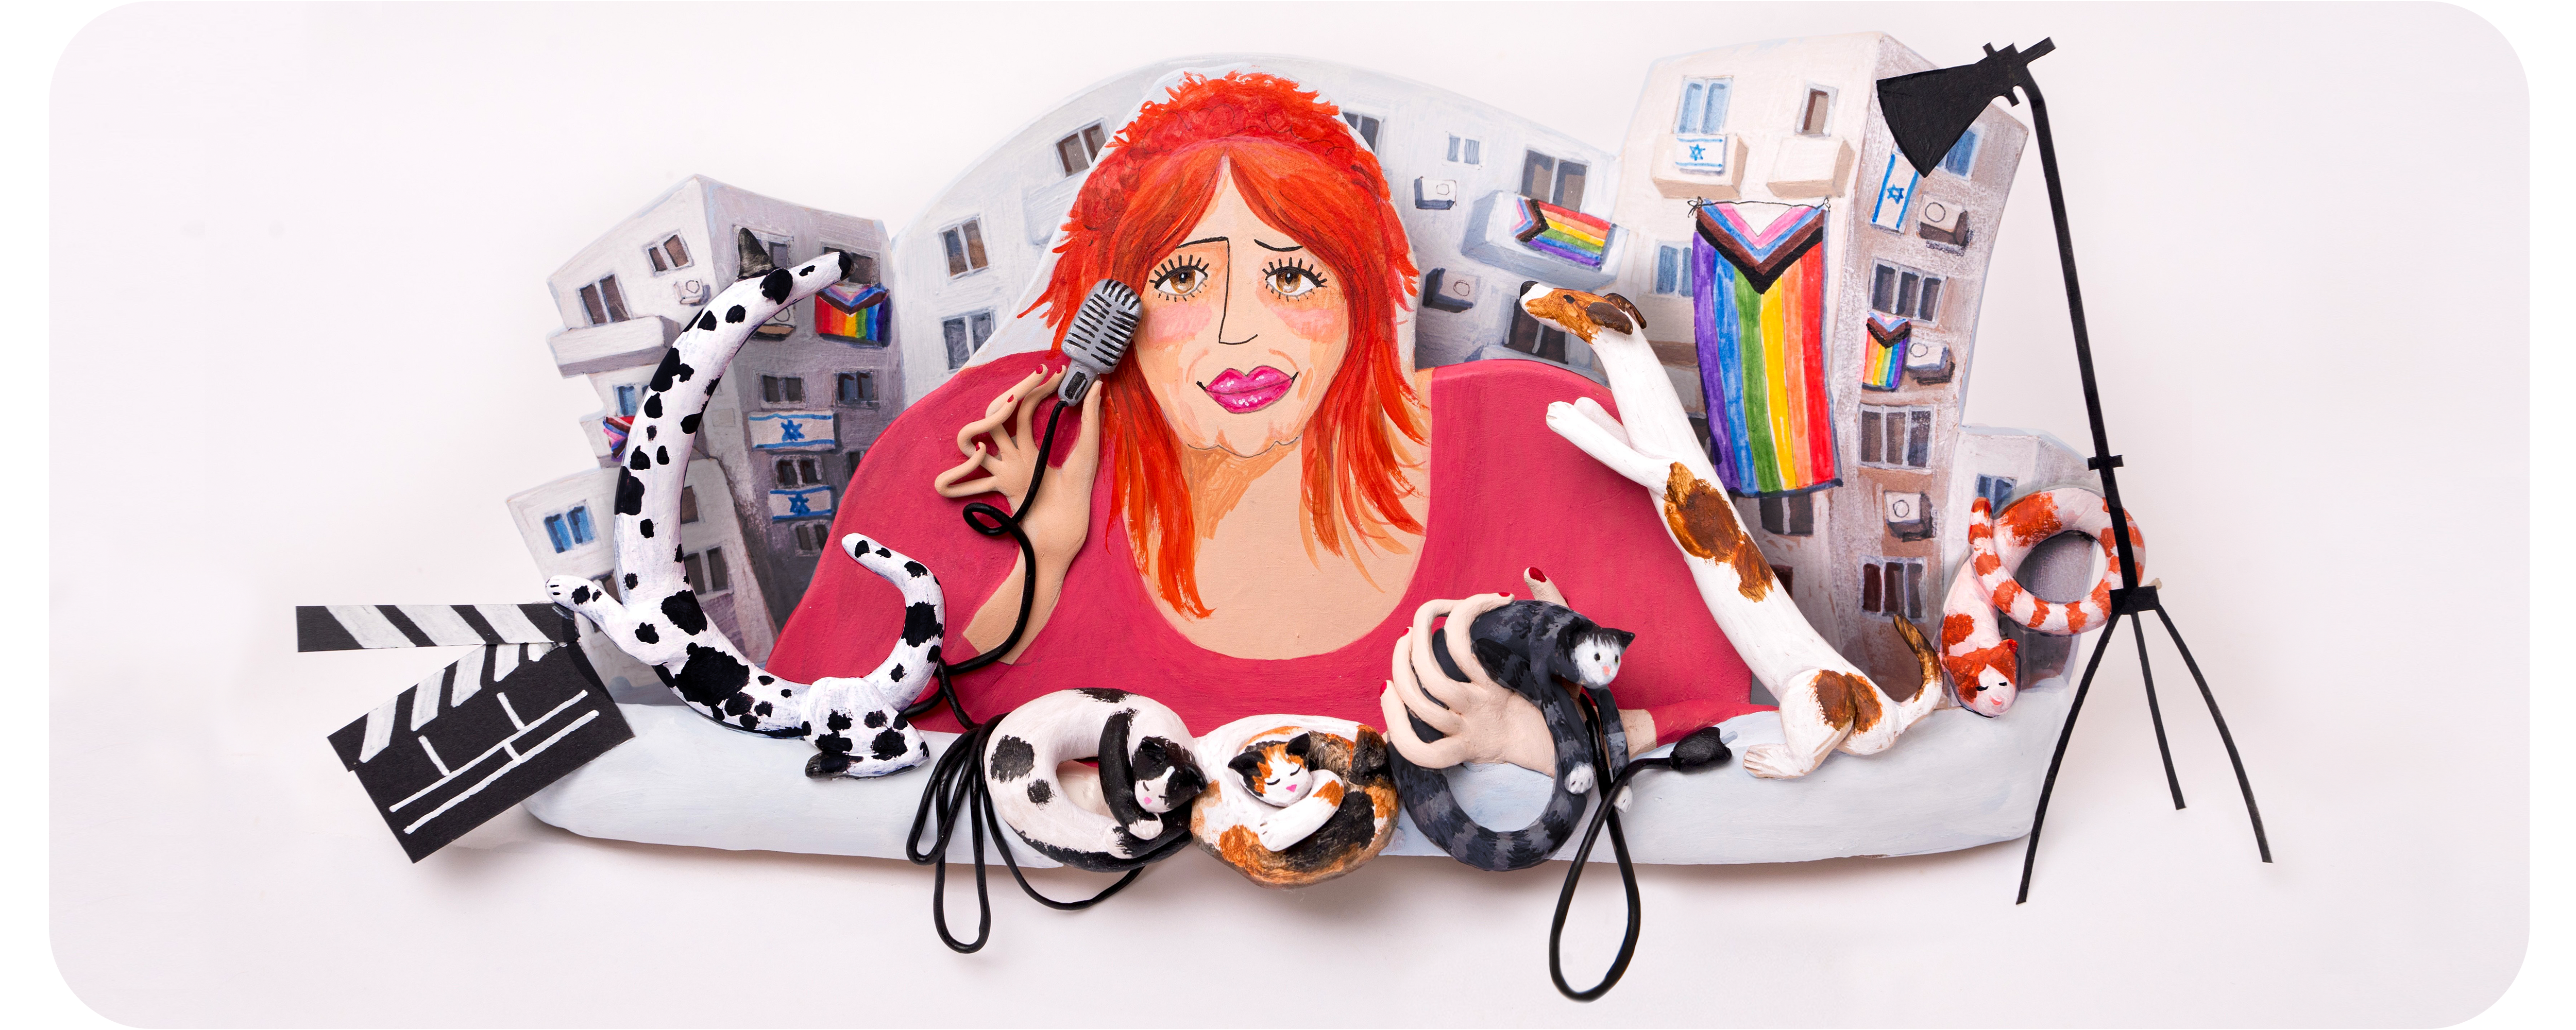 A diorama made of clay. Gila Goldstein is shown in the middle of the diorama from the torso up. She has bright red hair that is cut short with bangs that are swept to each side of her face and is wearing a pink scoop neck, long-sleeve top. She has mascara on and bright pink lipstick and is holding a microphone in her right hand and a black striped cat in her left hand. The GOOGLE logo is spelled out with figures of cats and dogs. There is a black and white film clapper in the bottom left corner and a spotlight tripod on the right. There is a white apartment building behind Gila. Many of the windows have Pride flags hanging from them.